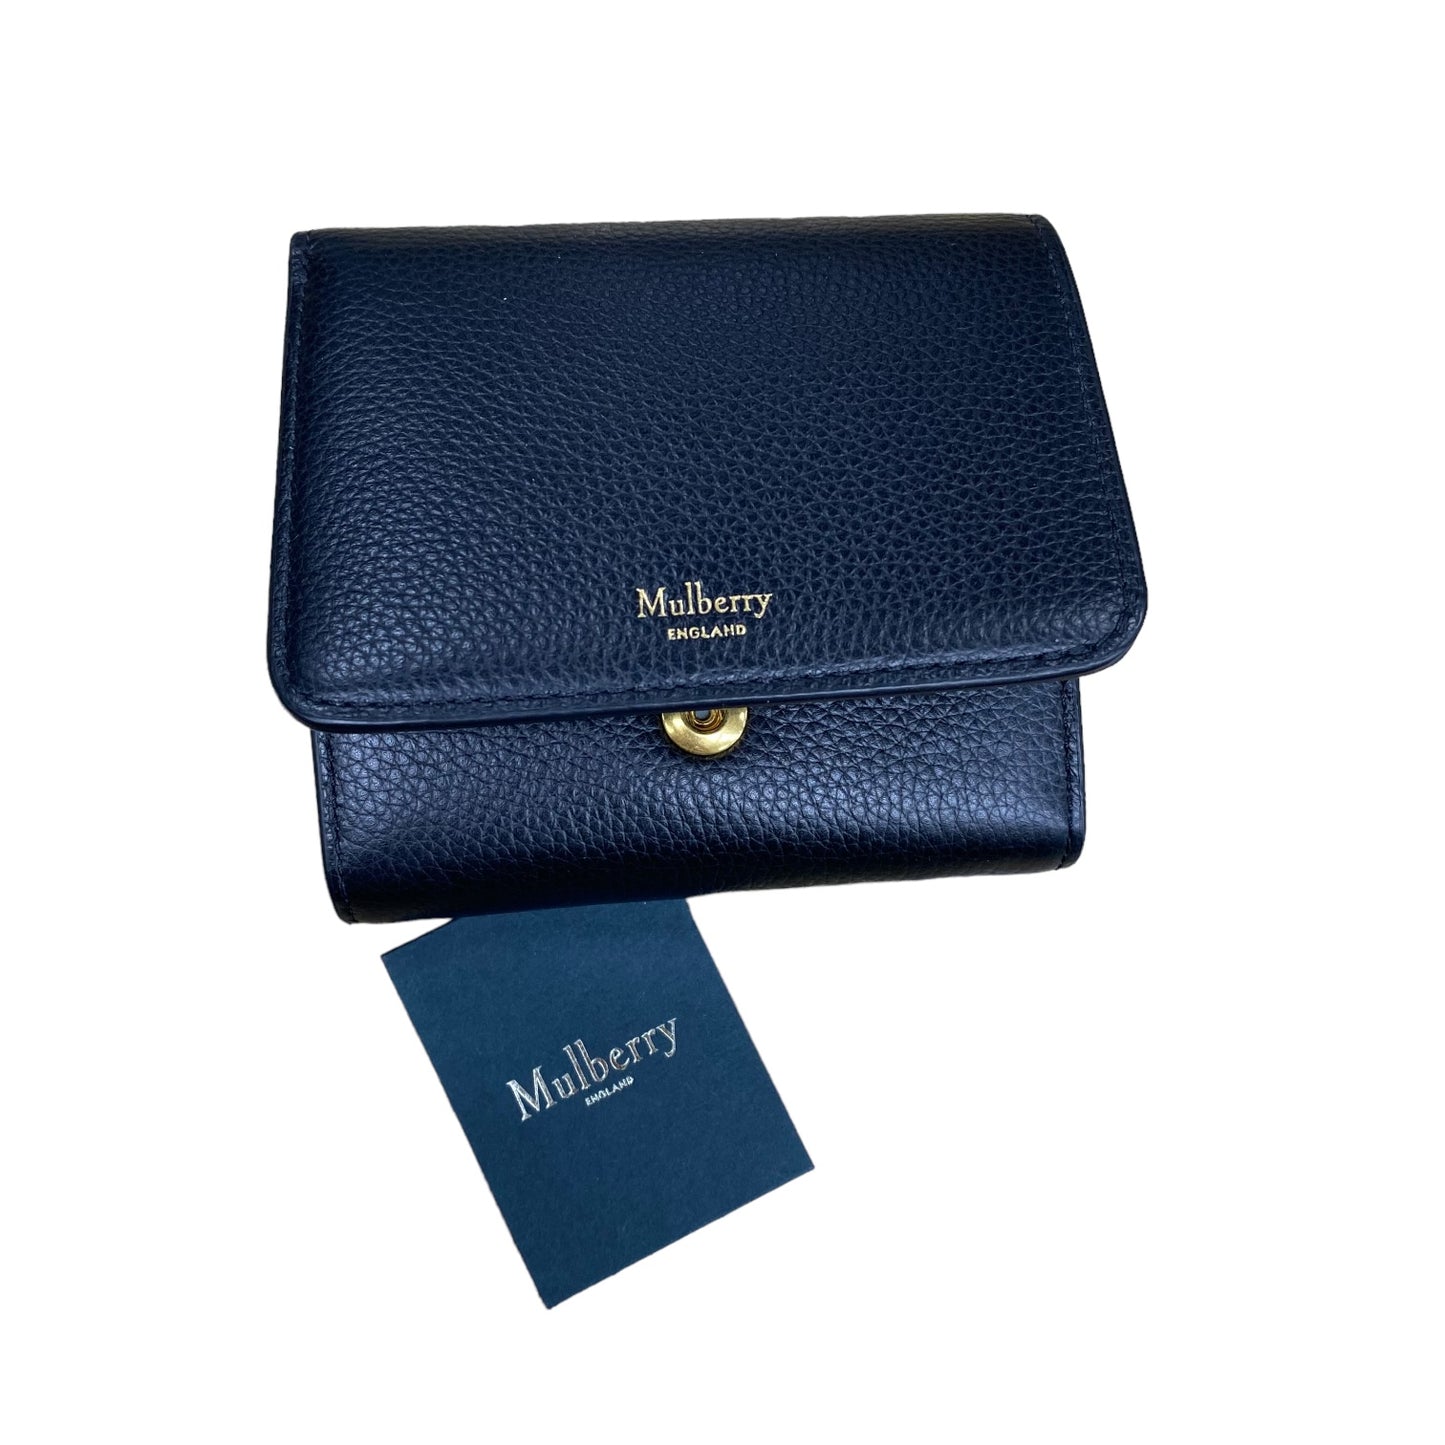 Designer Wallet By Mulberry  Size: Small